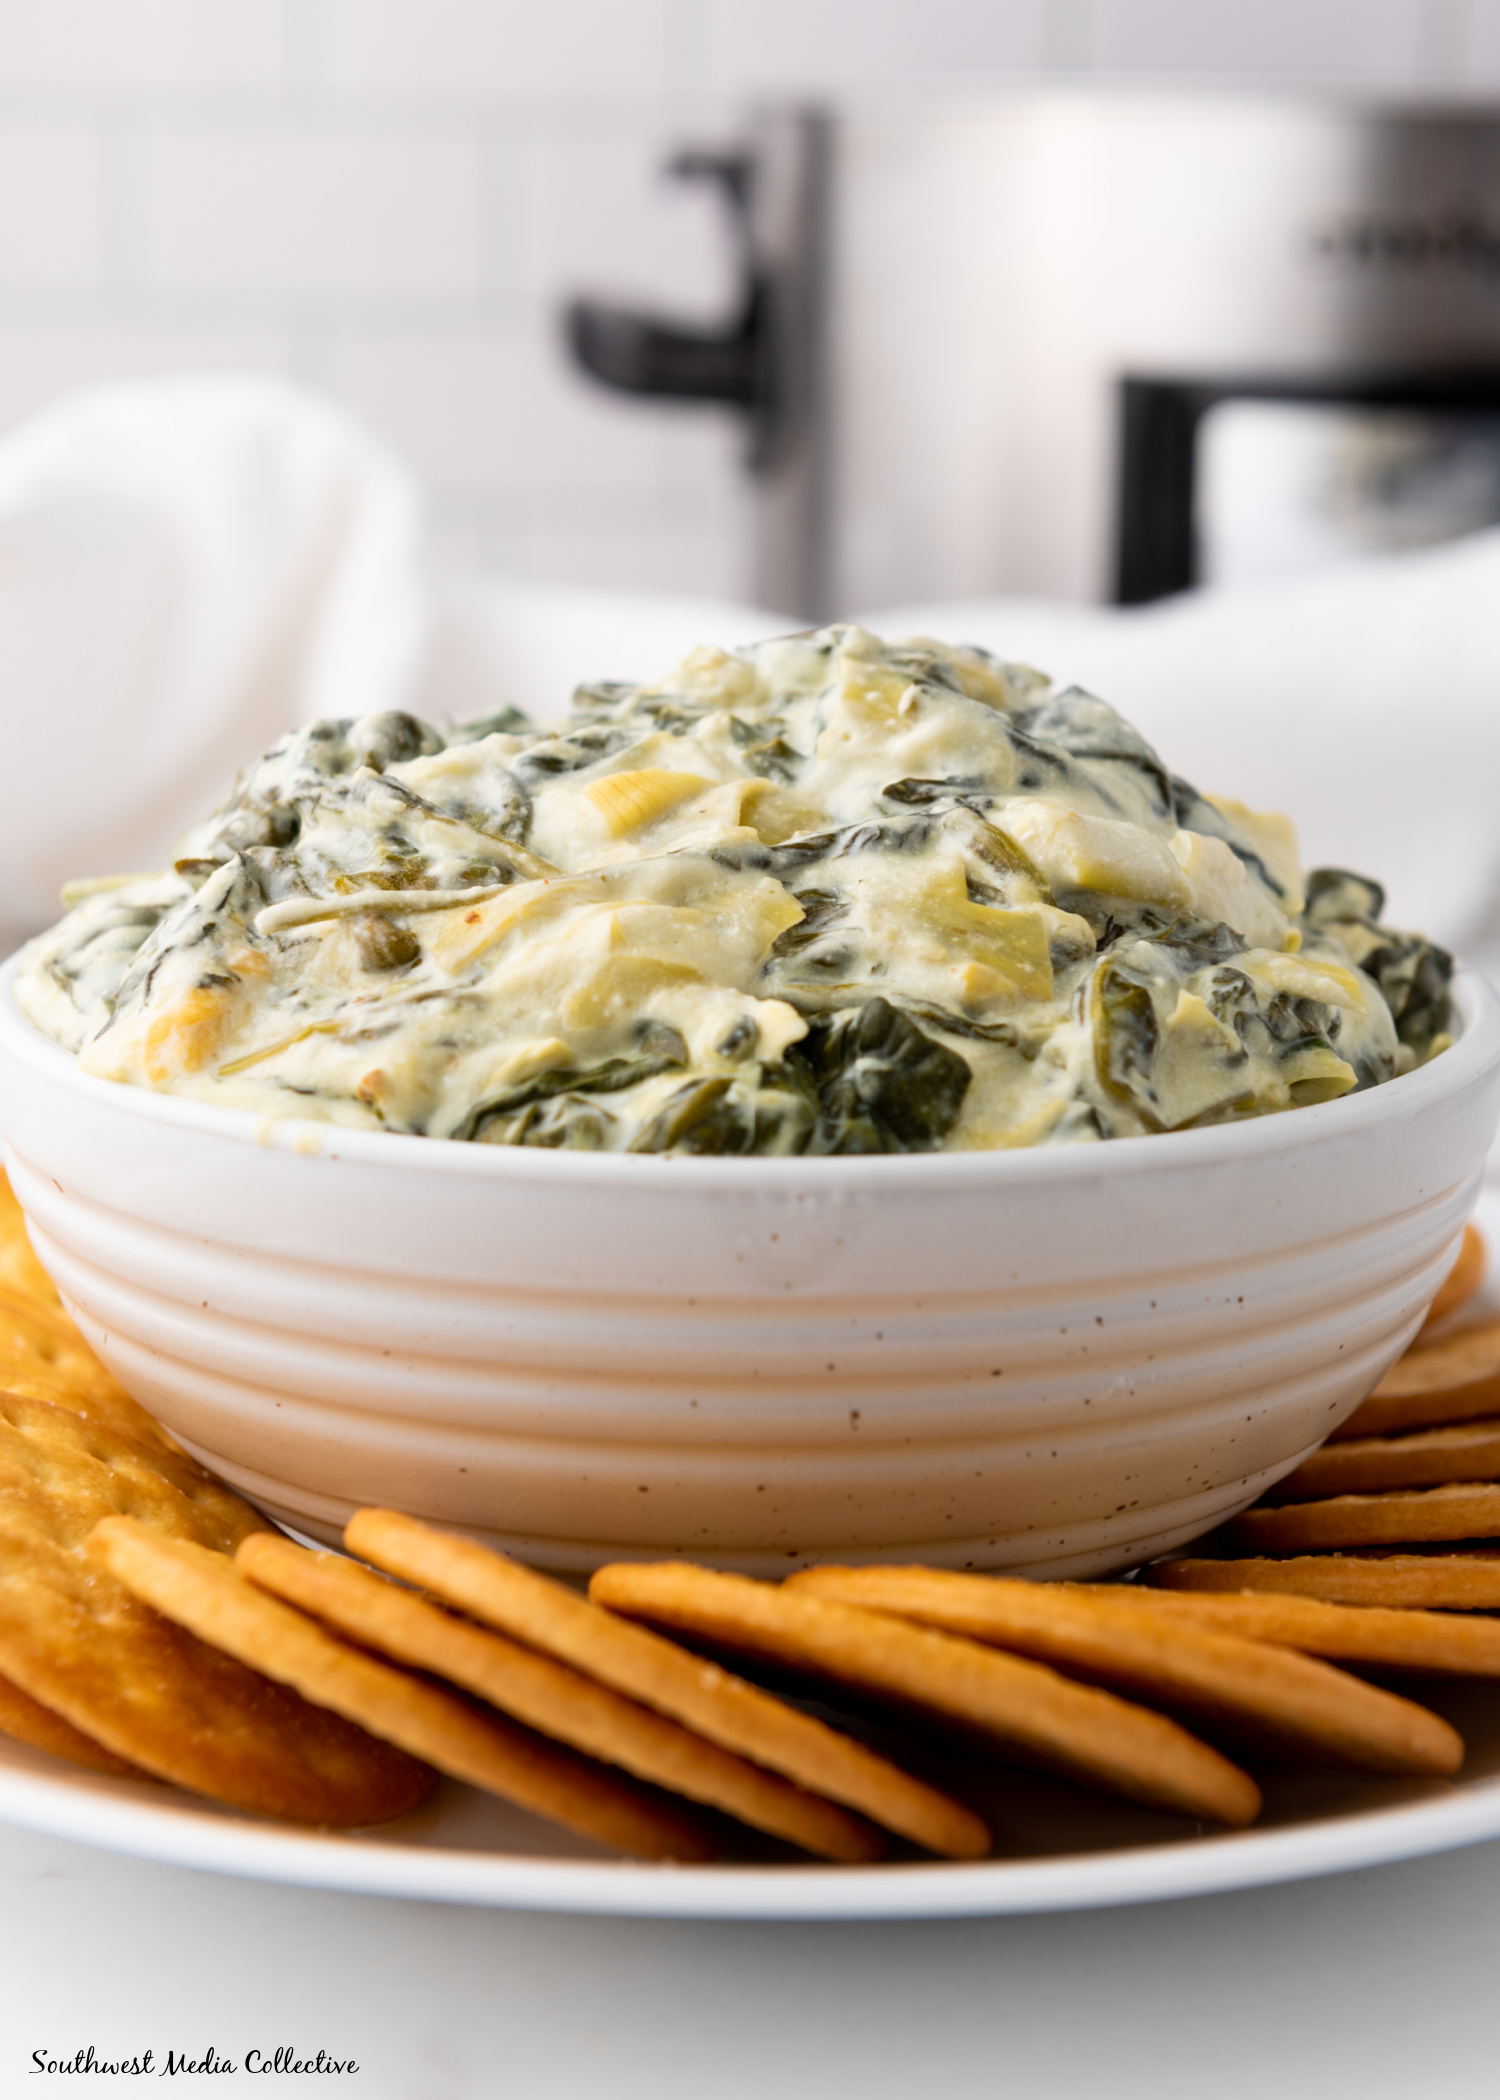 Slow Cooker Spinach Artichoke Dip is always a favorite at parties and get togethers. Make it with just a few simple ingredients in your slow cooker or crockpot for an easy way to feed a crowd.